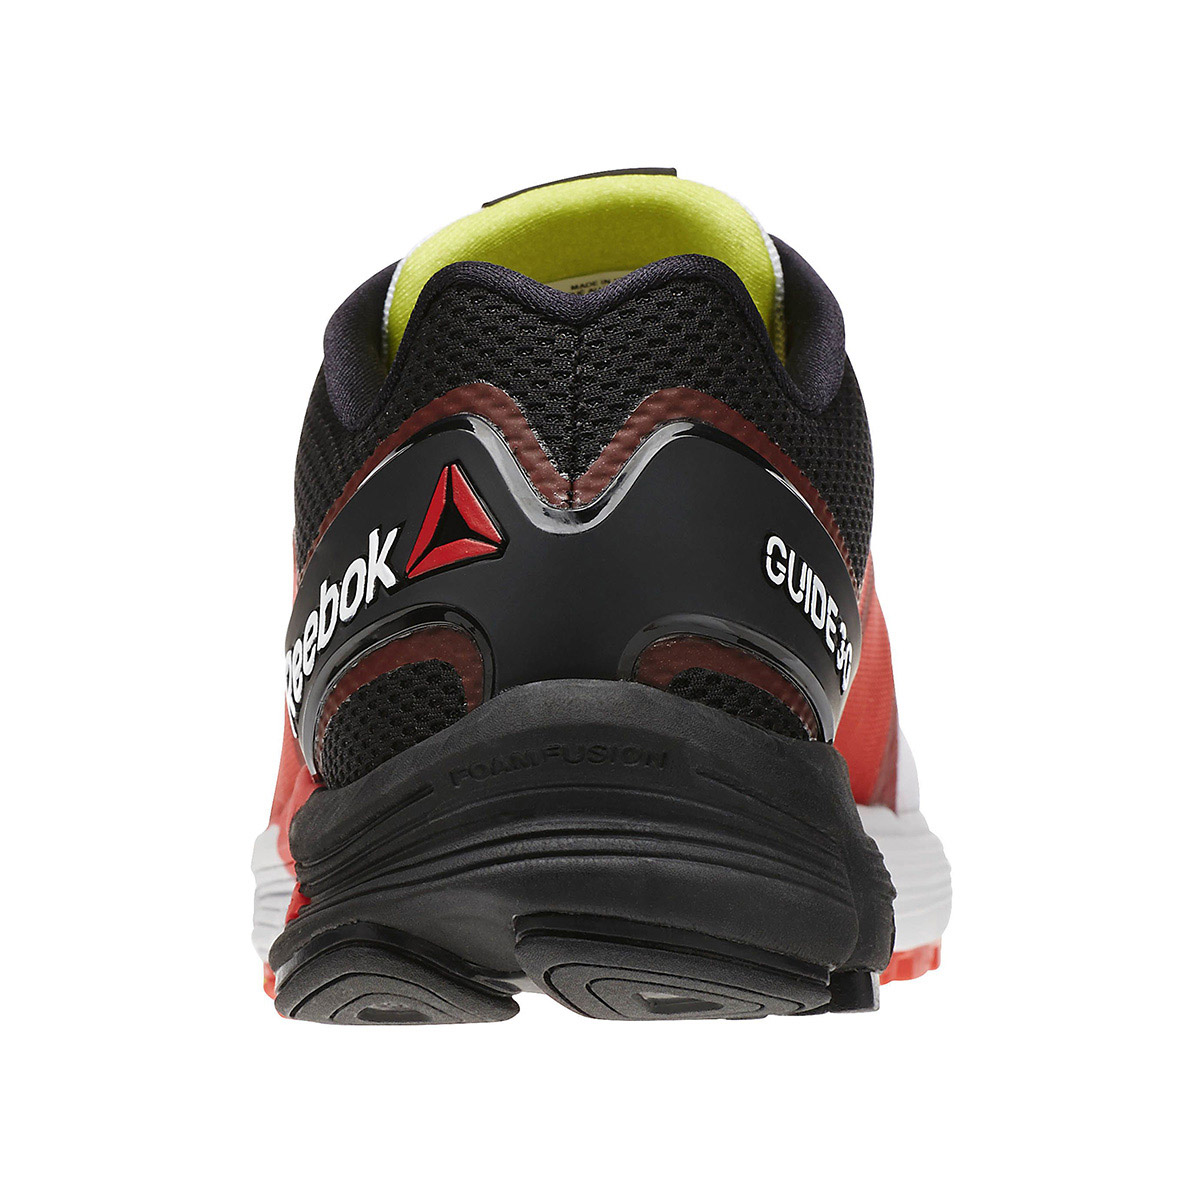 REEBOK Guide 3.0 Running Shoes - Bob's Stores